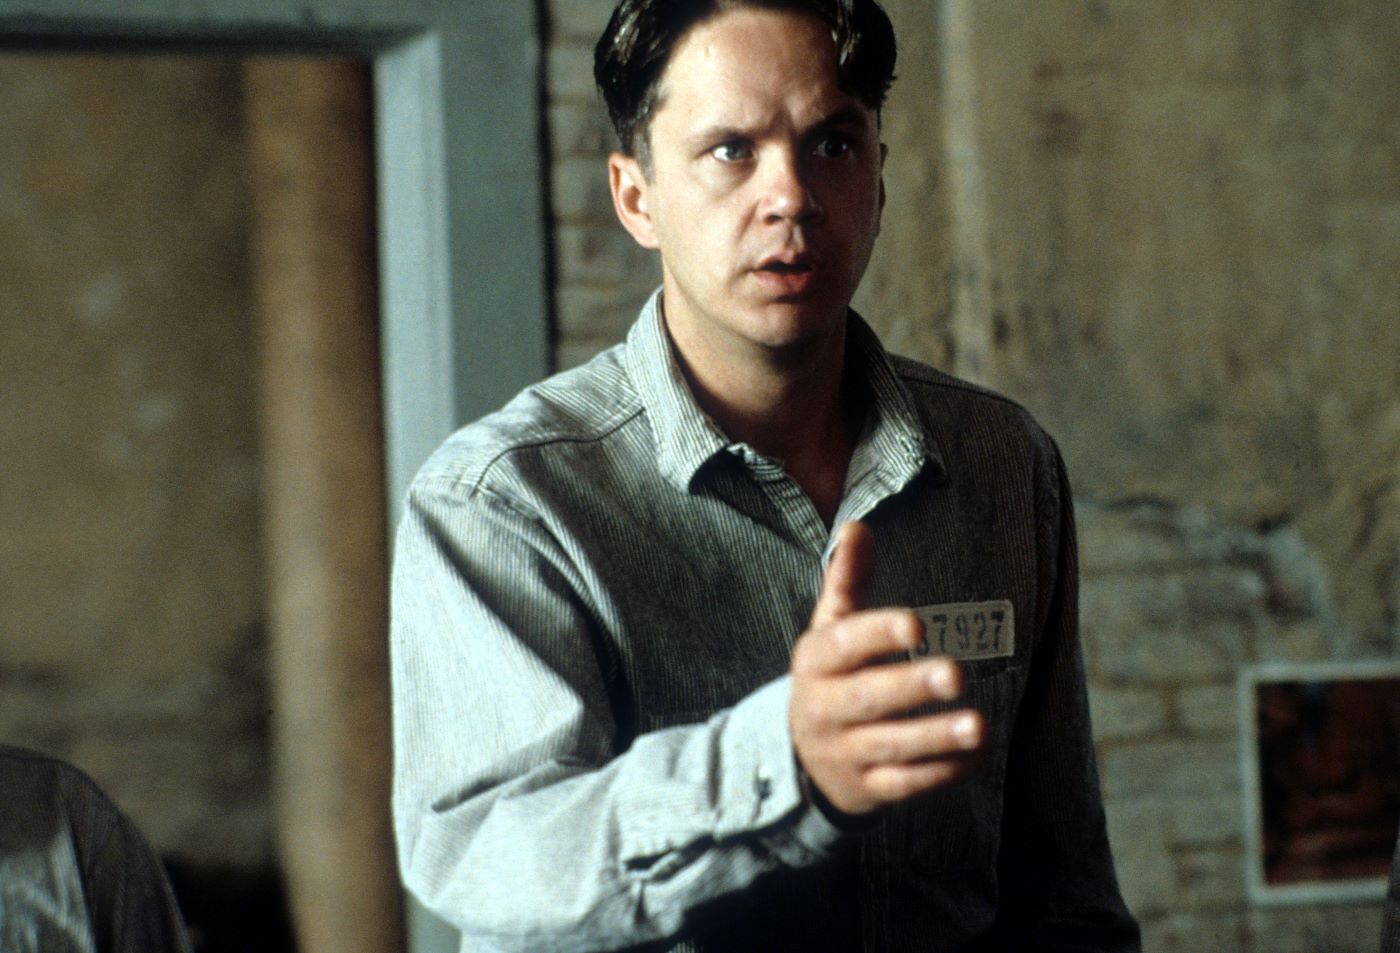 Tim Robbins in his younger days